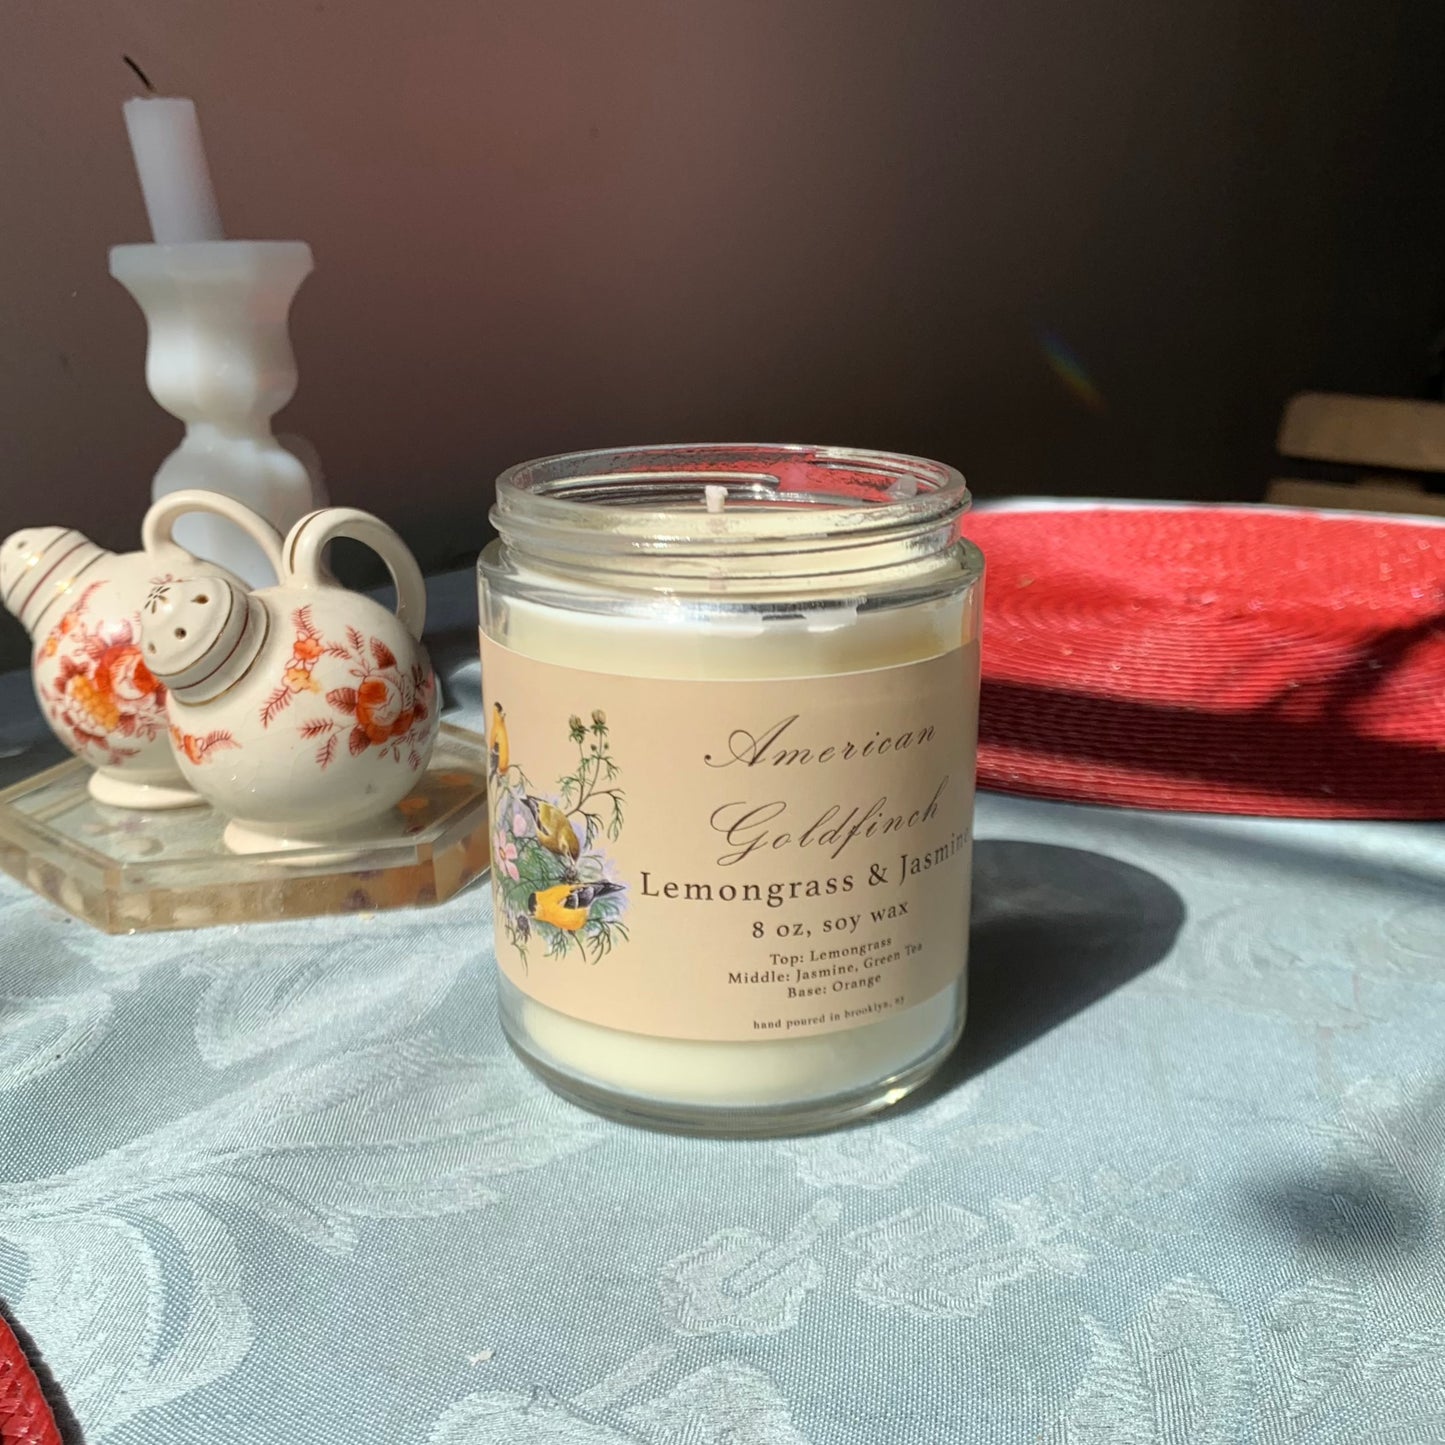 American Goldfinch: Lemongrass and Jasmine Green Tea Scented Candle